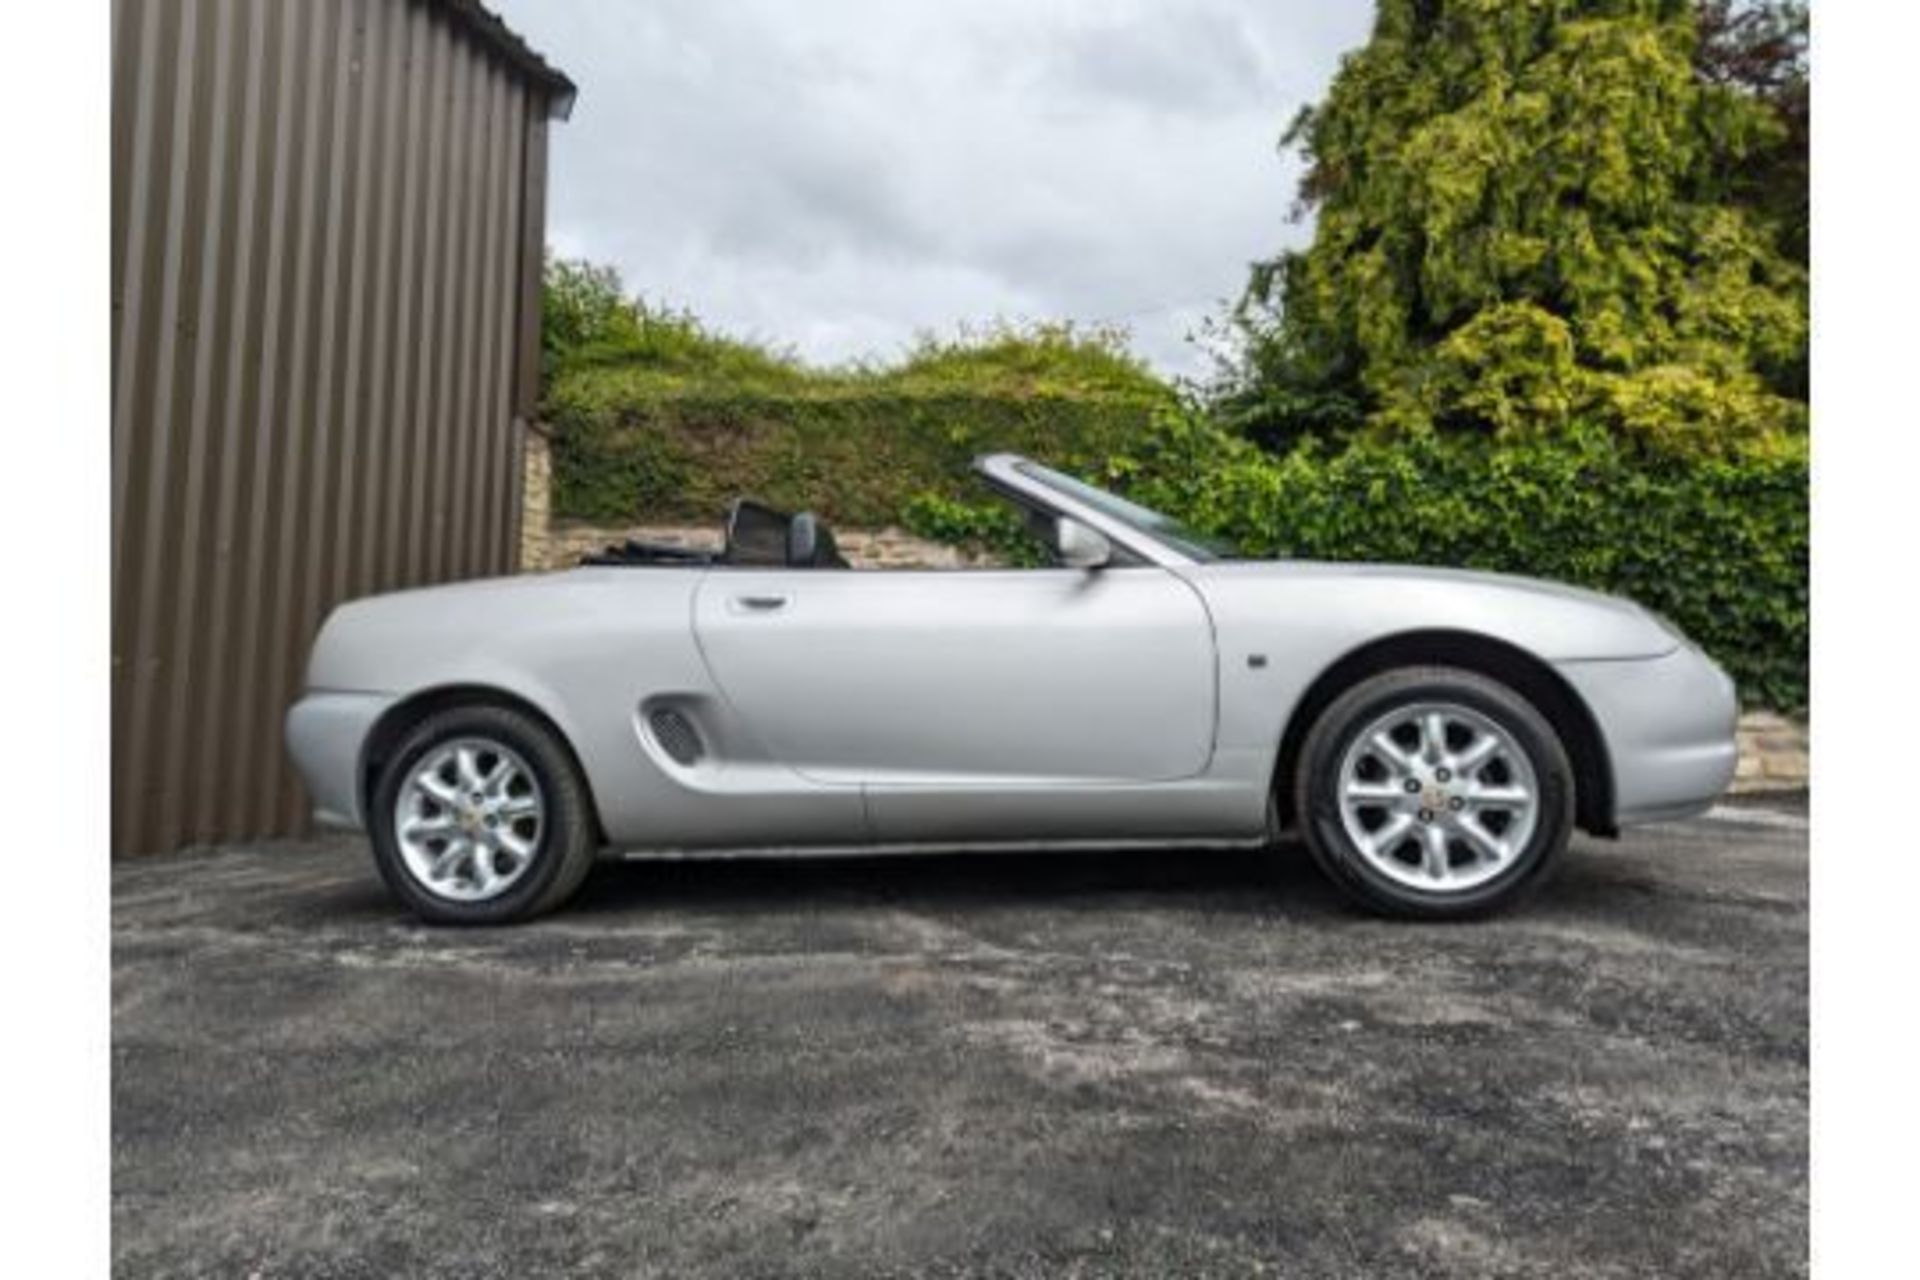 MG MGF Convertible Silver Registered Year 2000 (W Reg) 97545 Miles 1.8L, - Image 10 of 11